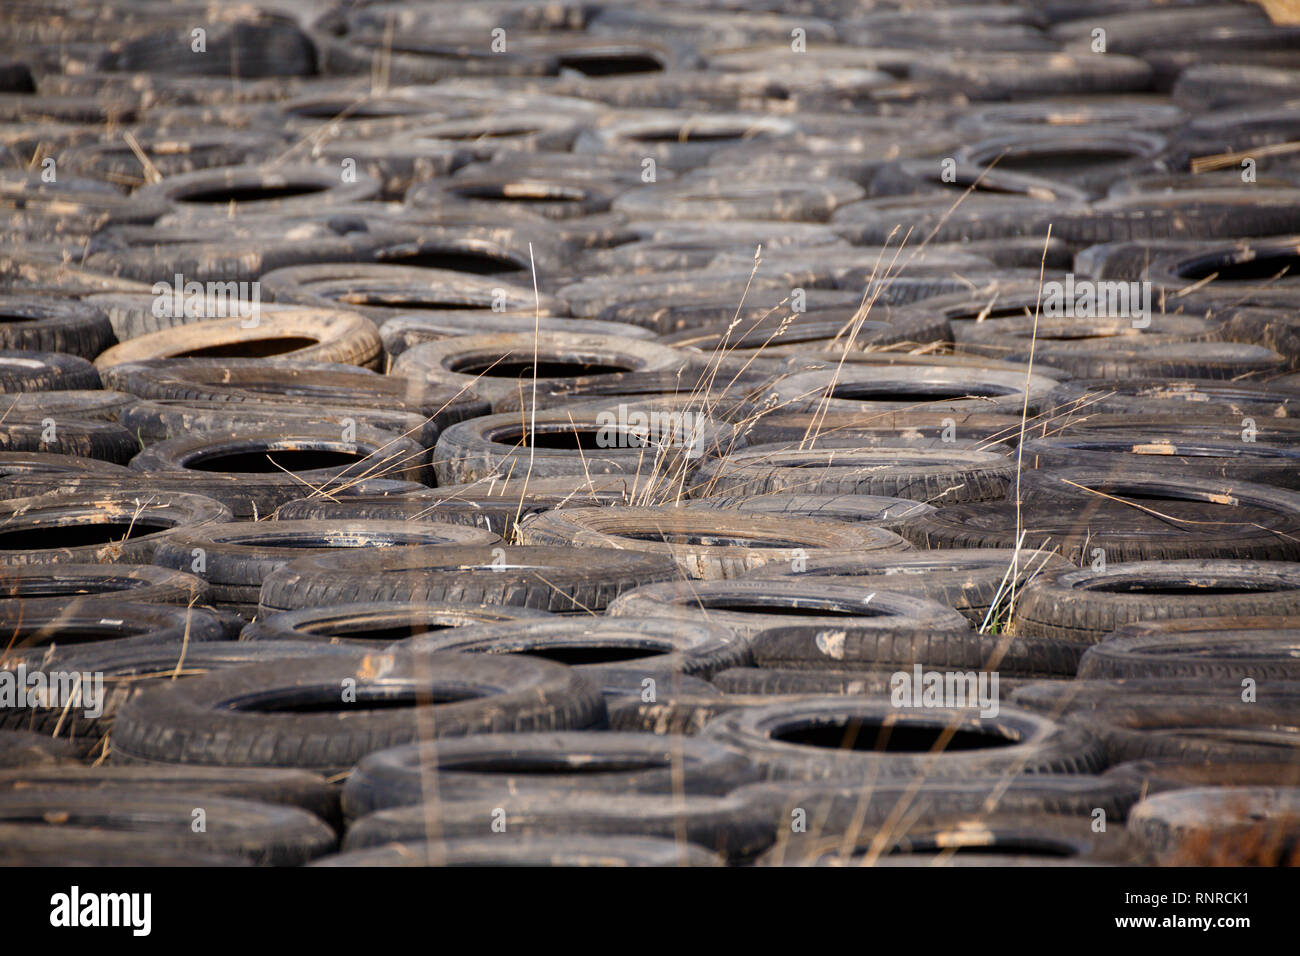 Old used tires dump pollution and disposal Stock Photo